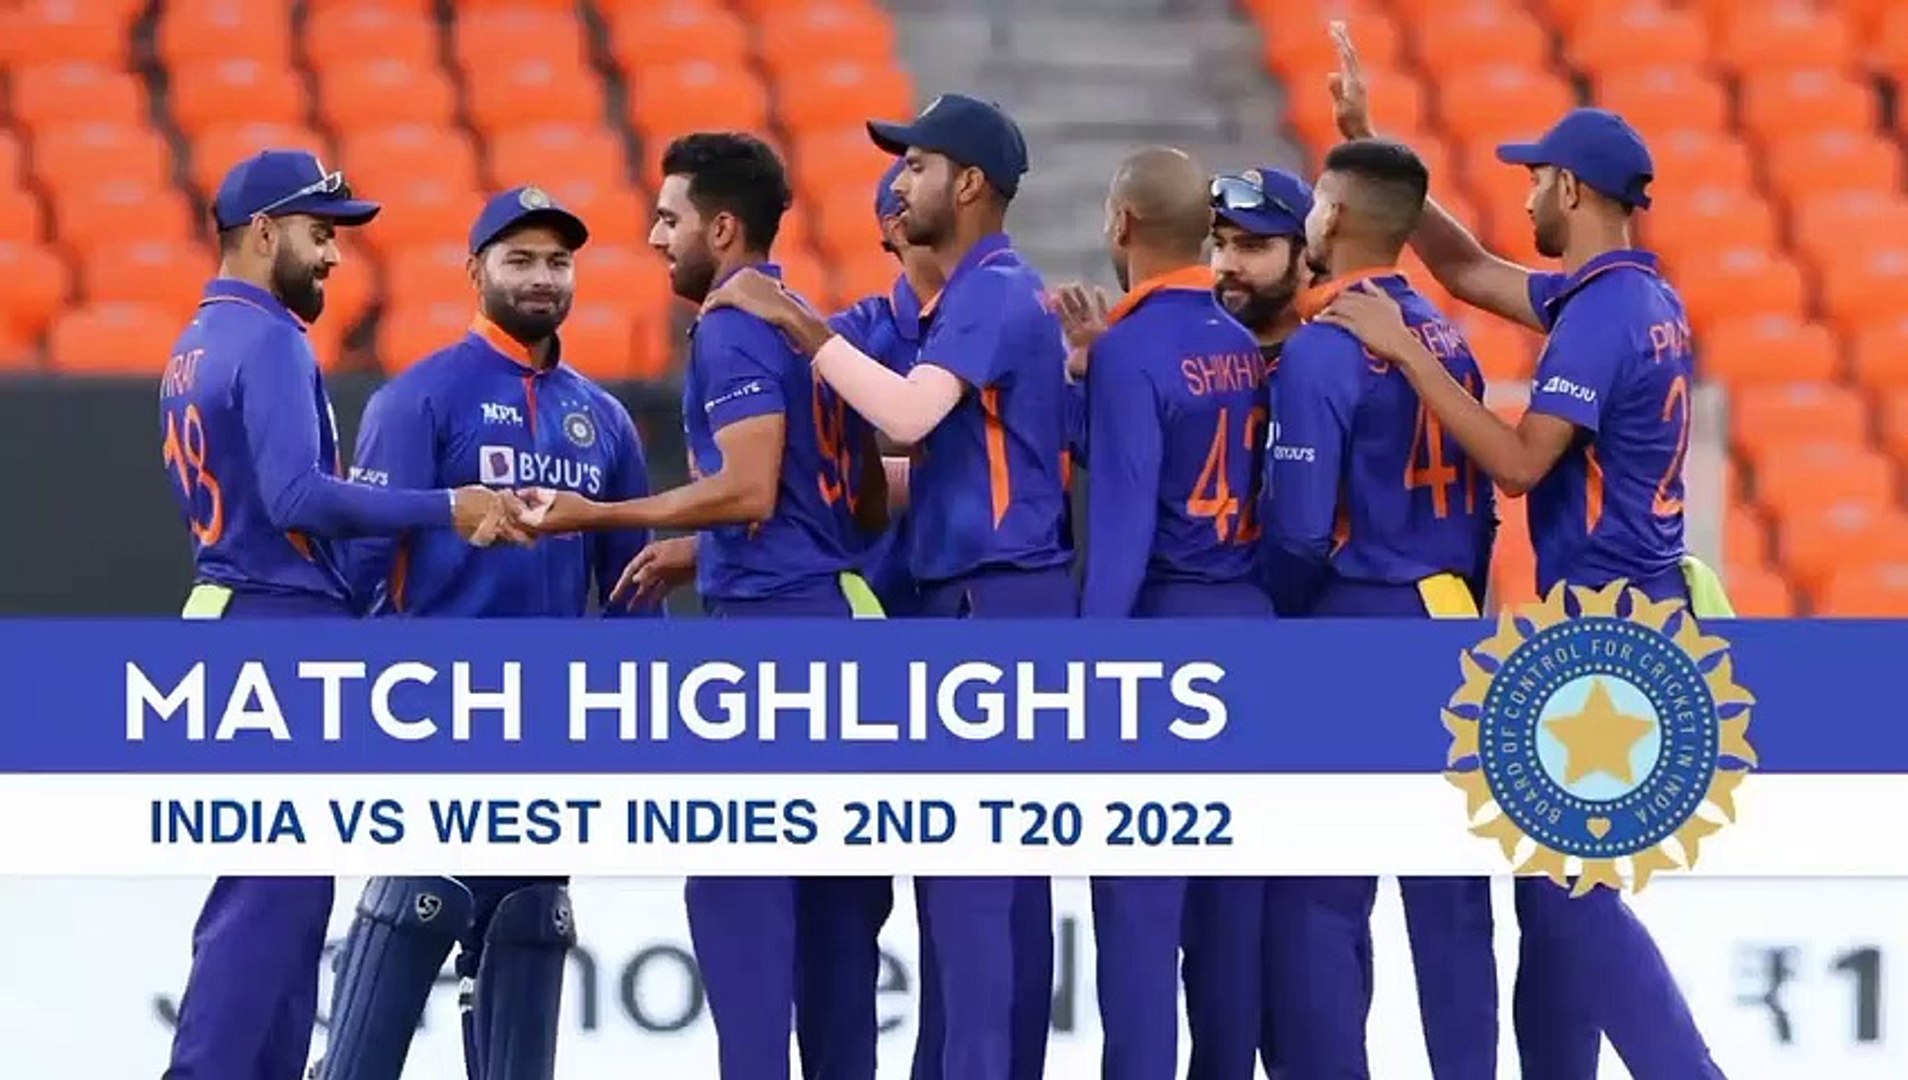 India vs West indies 3rd T20 Highlights 2022 Ind vs WI